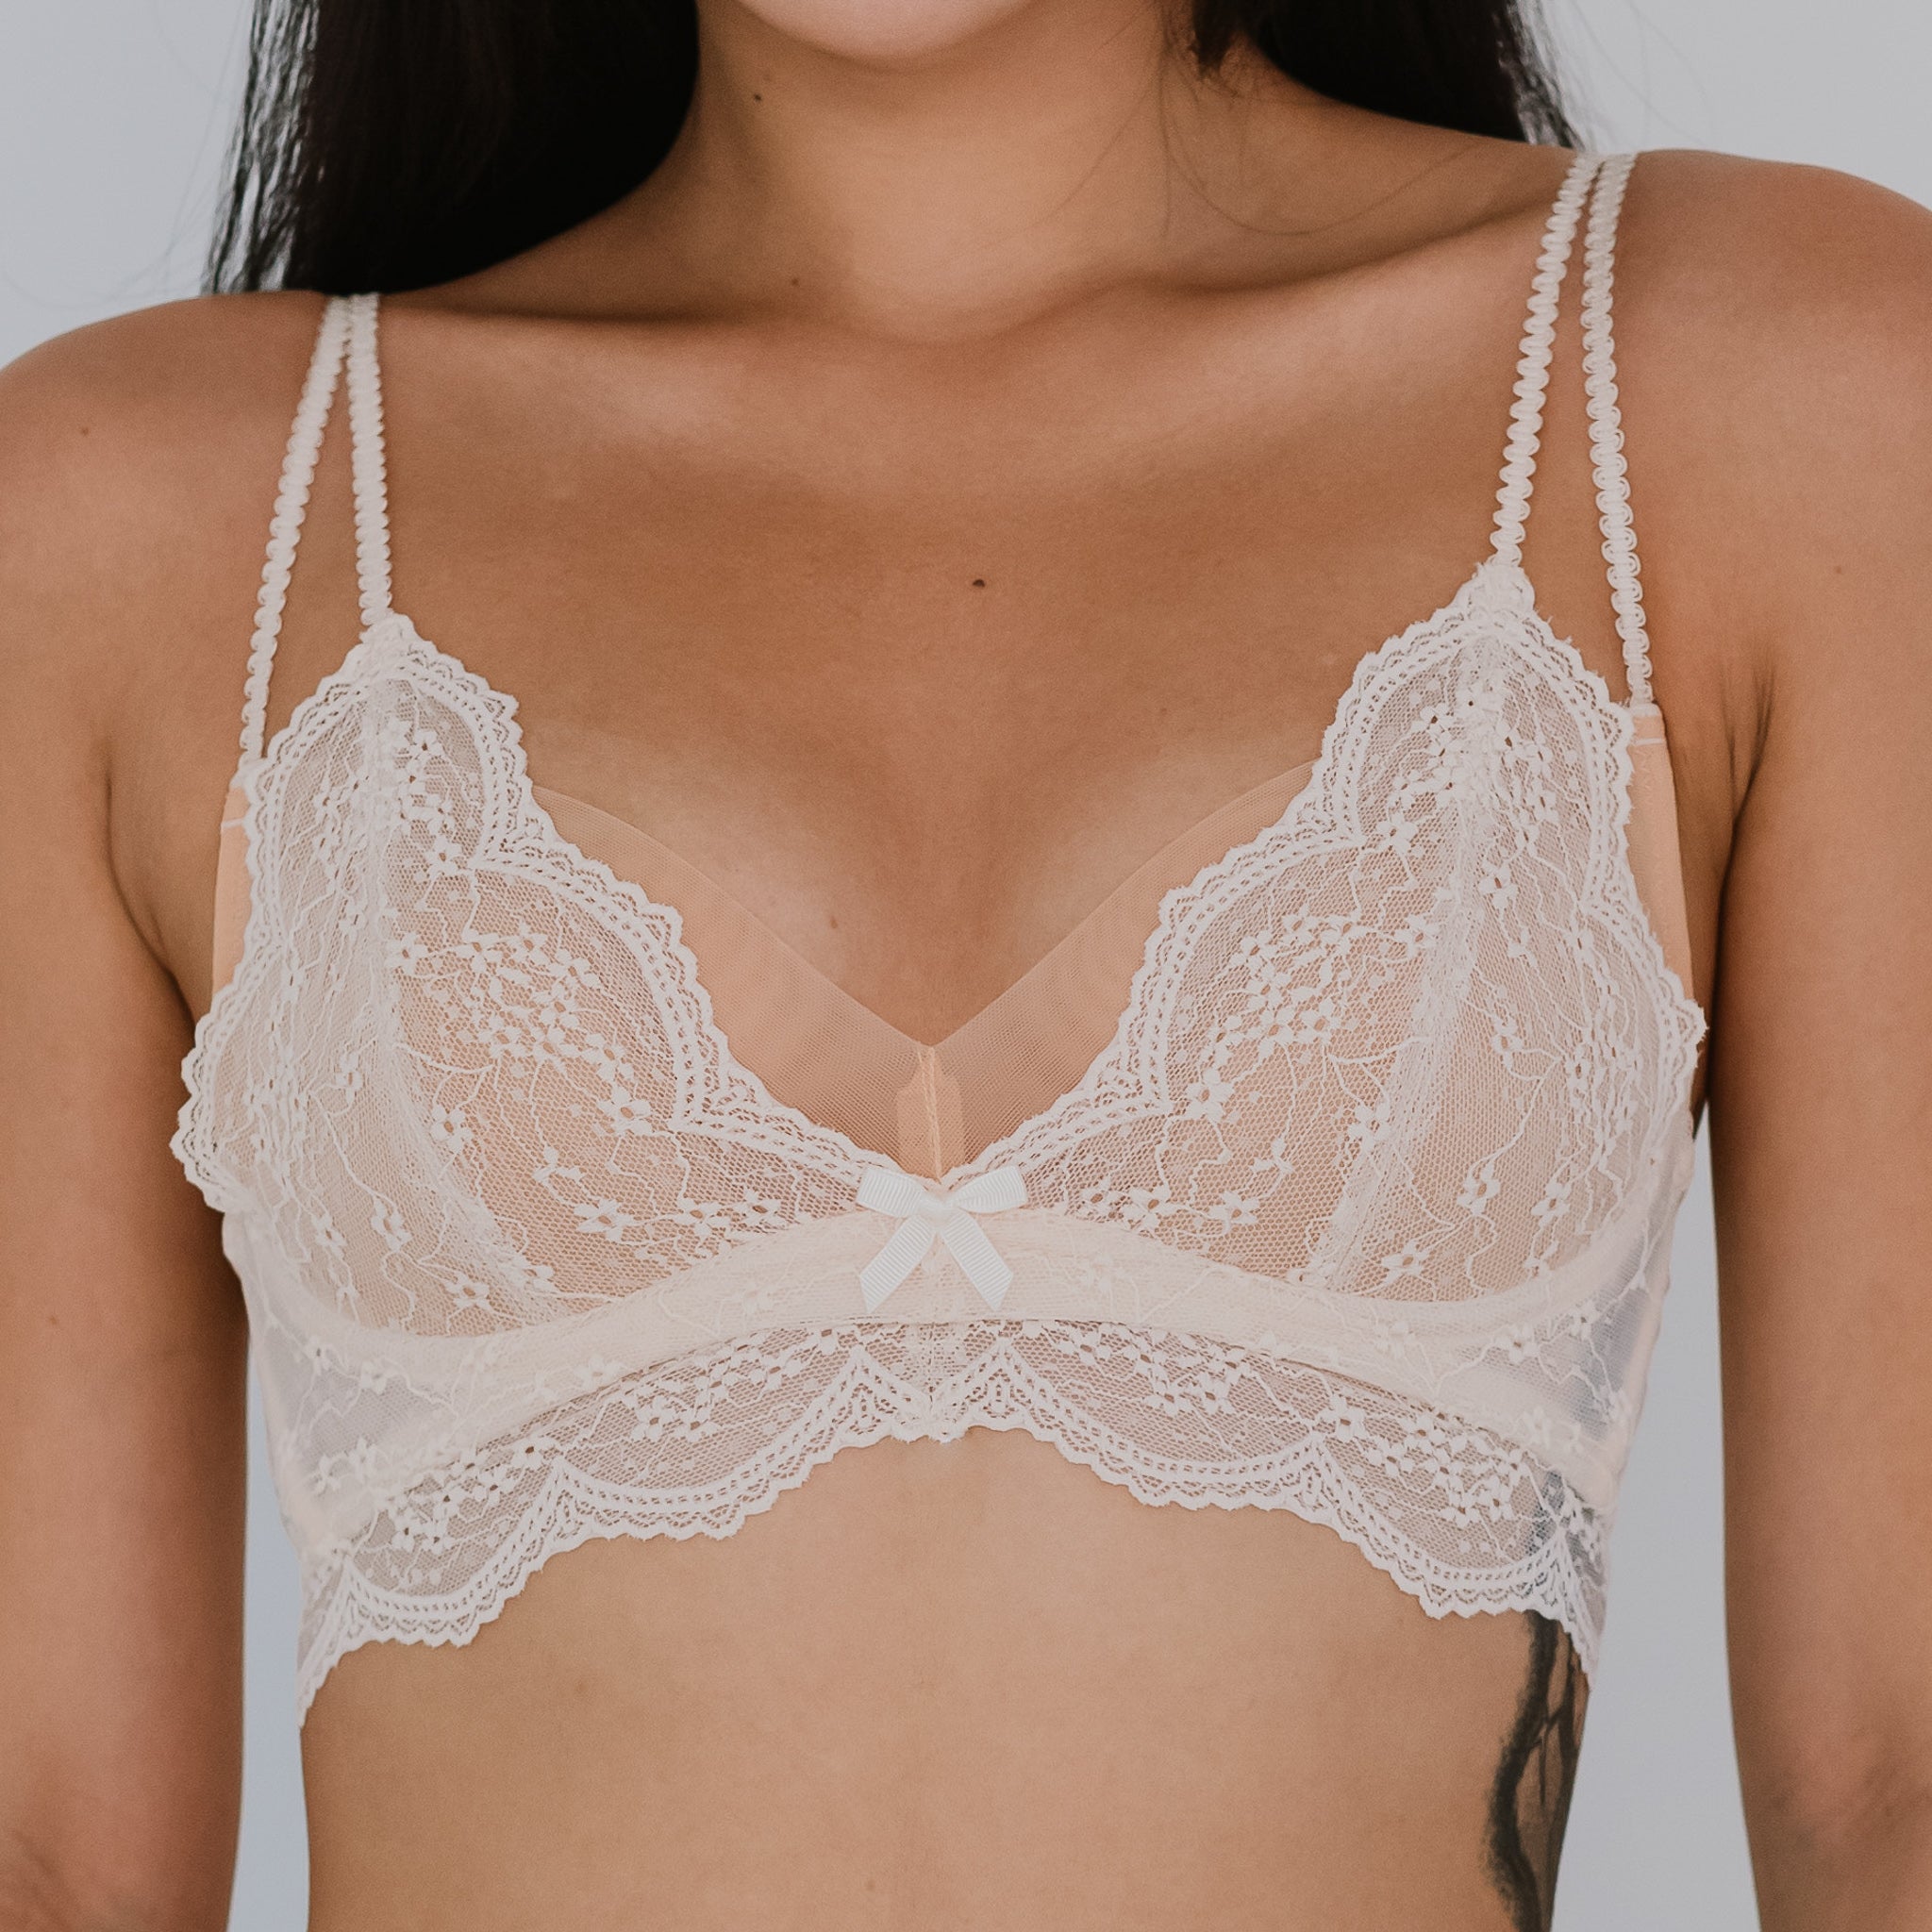 Lace Unlined Side Support Bra 34DDD, Hazel/Barely There